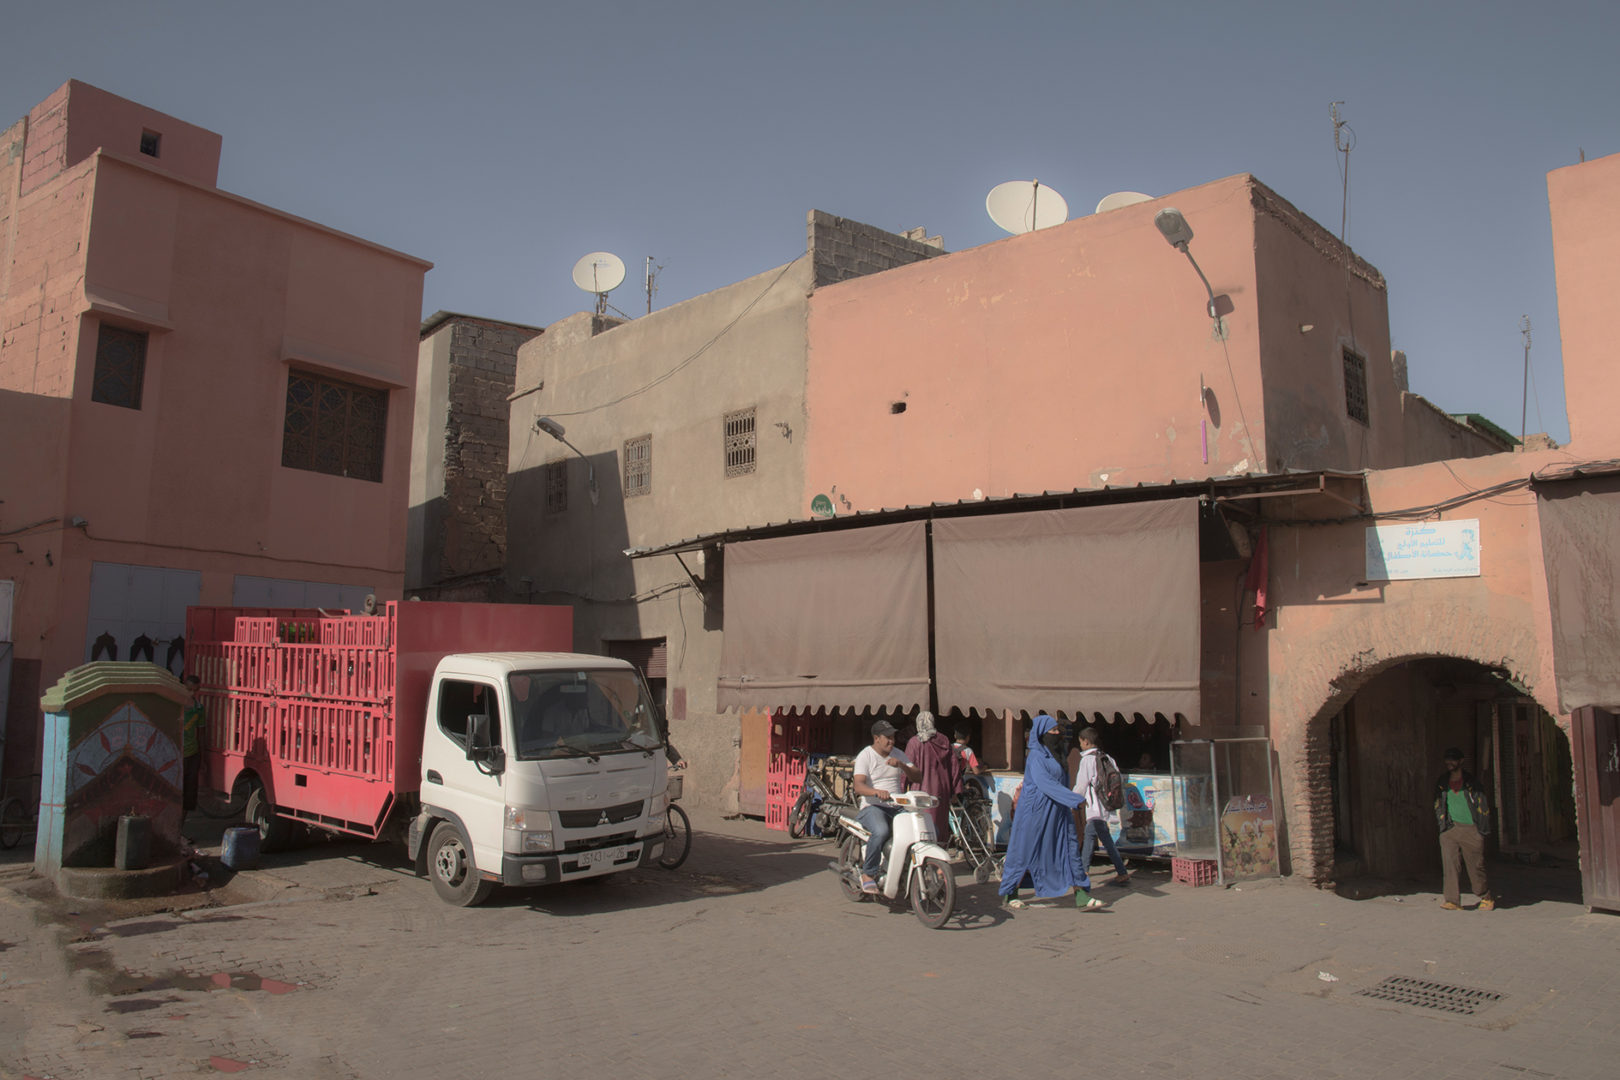 A red truck and a woman in blue - Marrakech